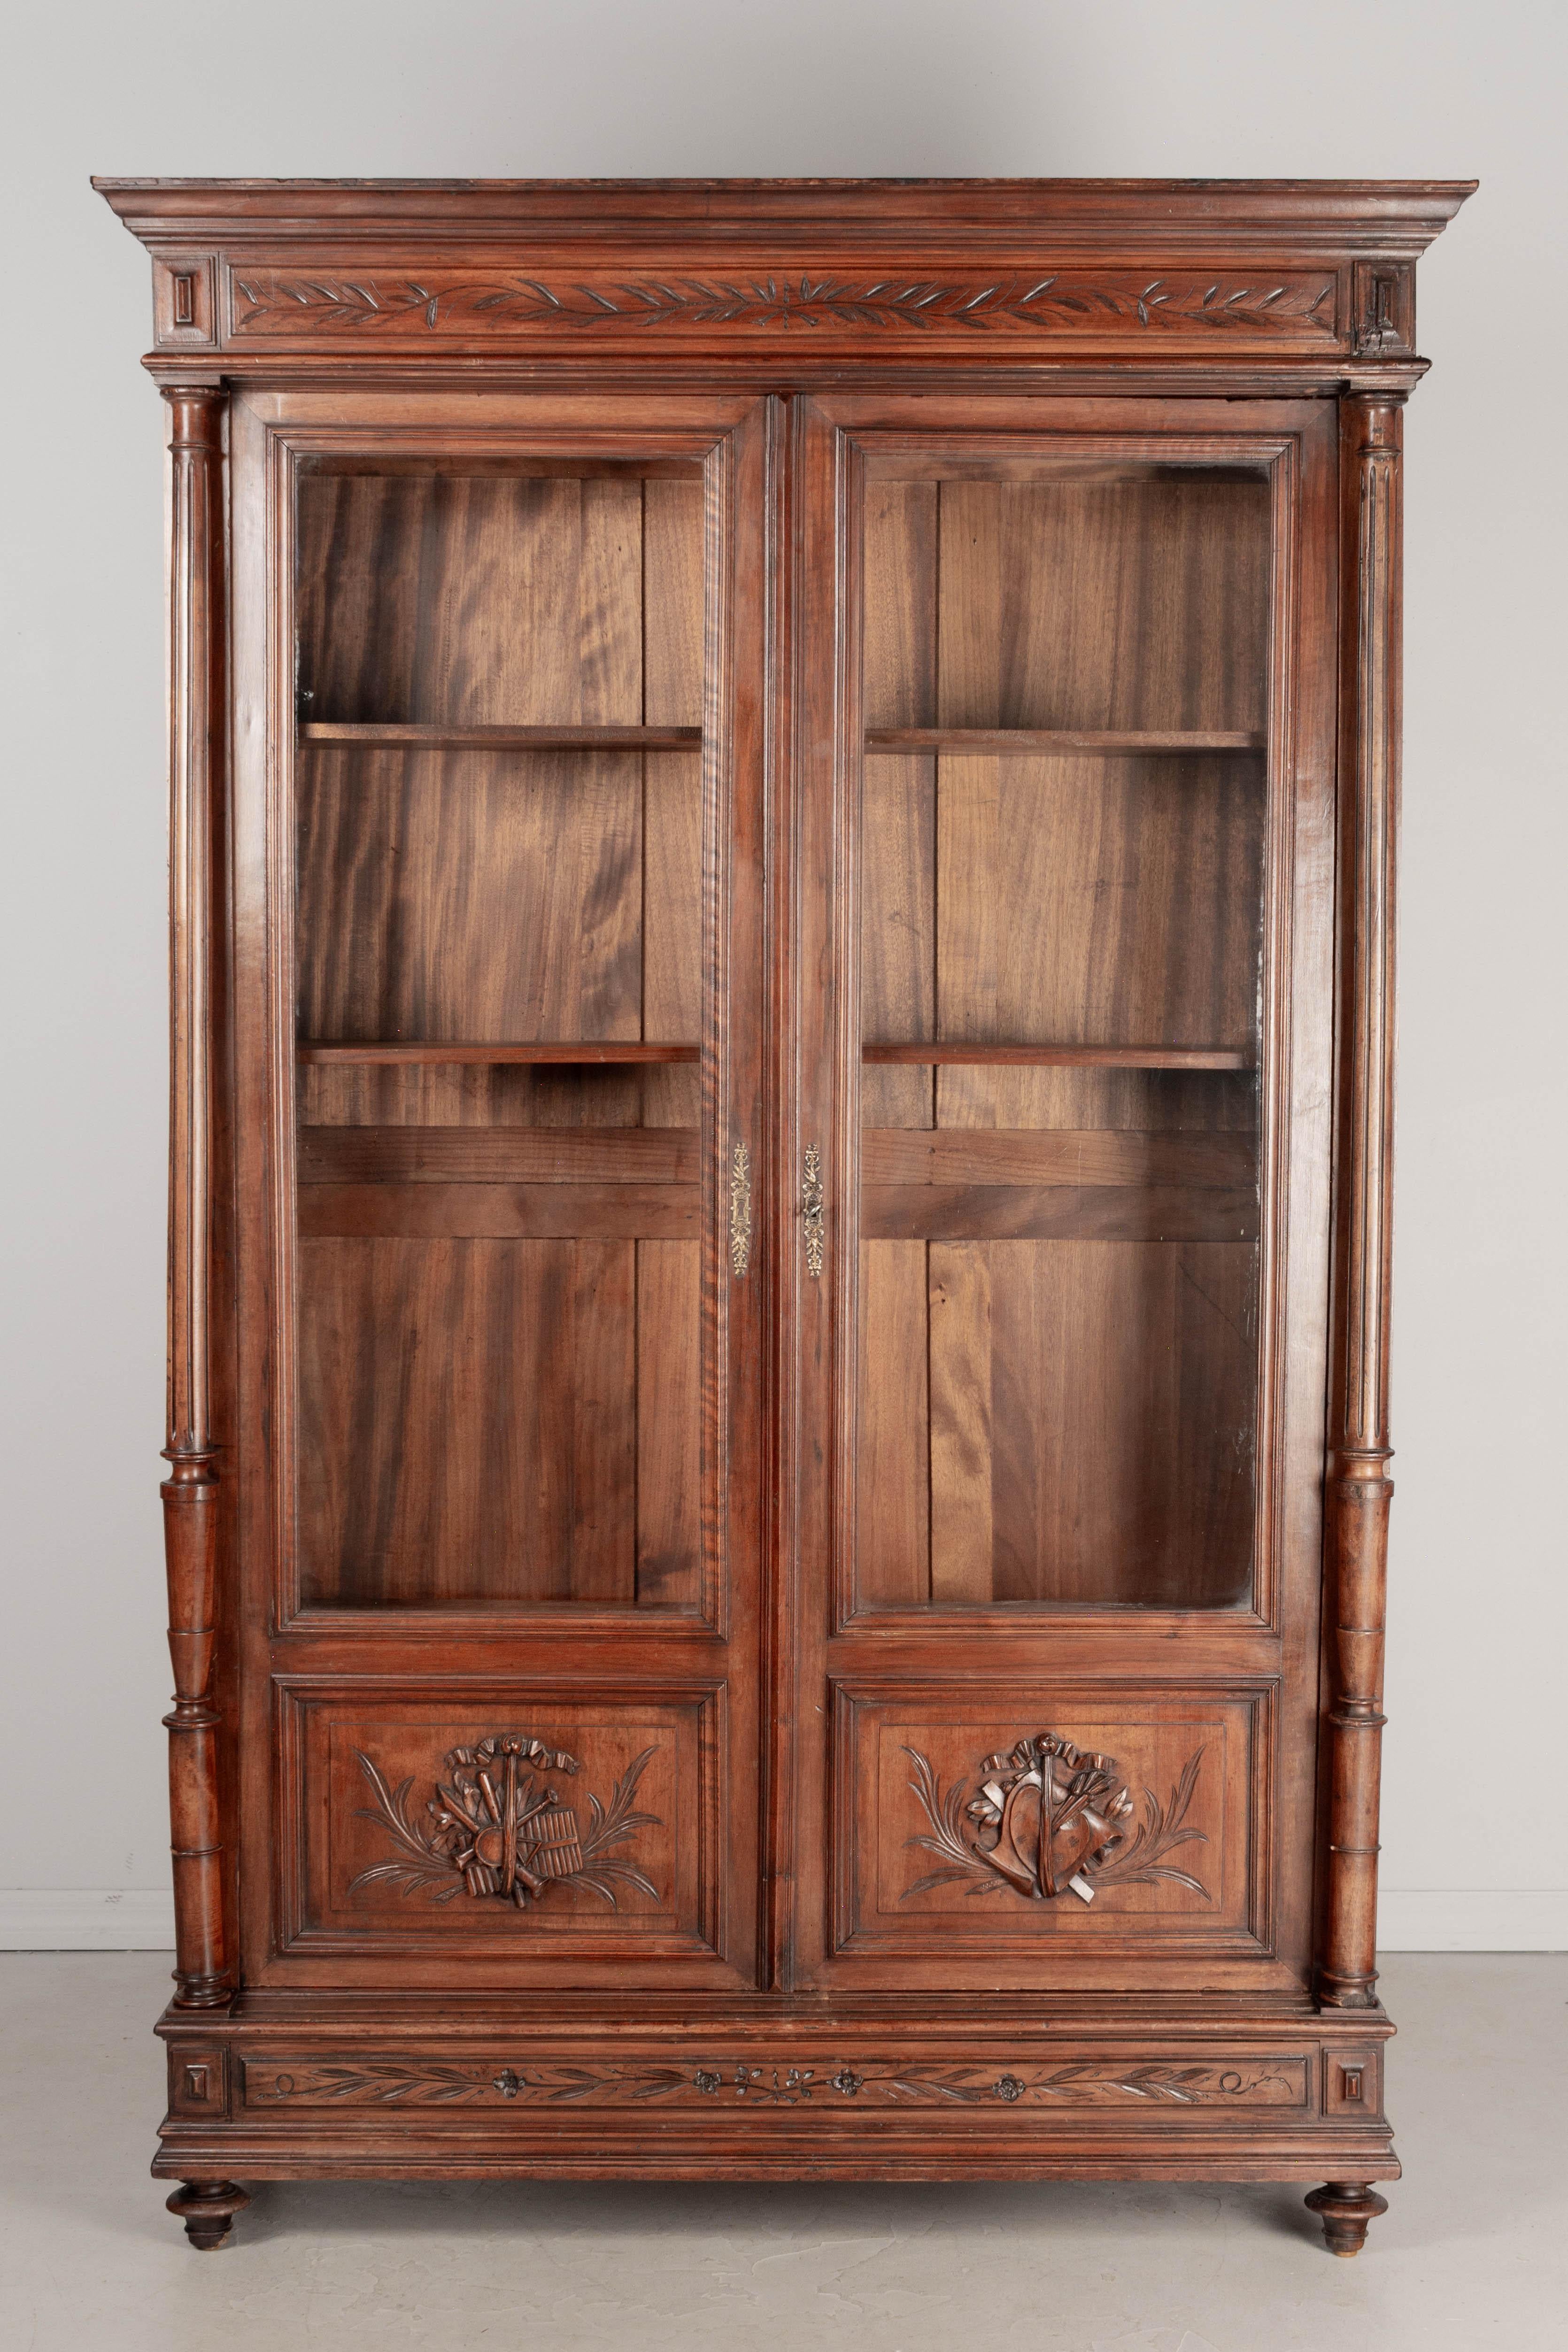 19th Century French Louis XVI Style Bibliotheque or Bookcase In Good Condition For Sale In Winter Park, FL